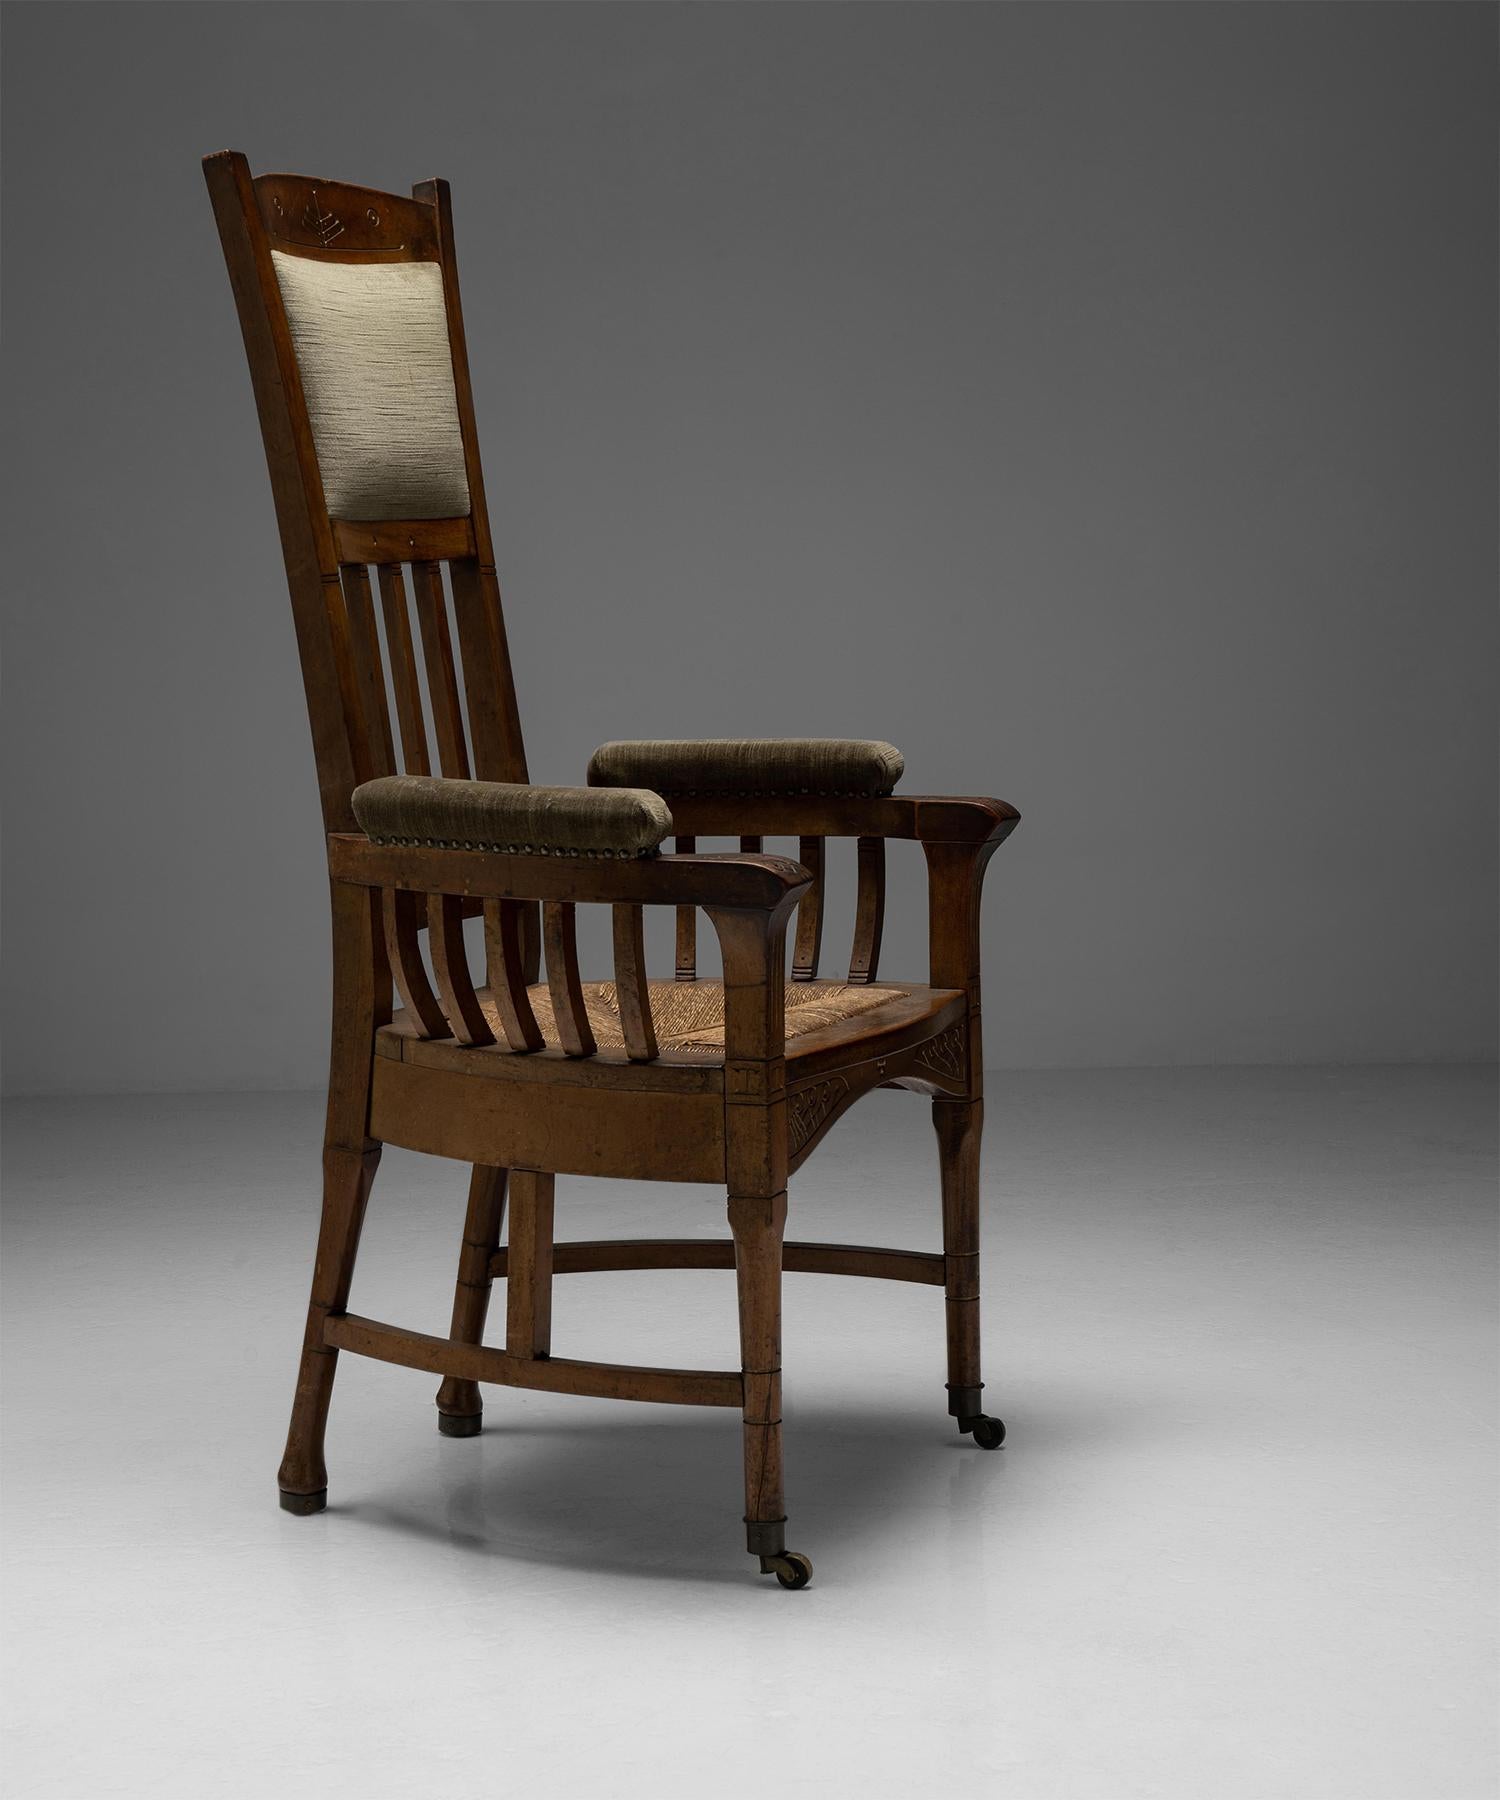 Upholstery Arts & Crafts Armchair No.1, France, Circa 1900